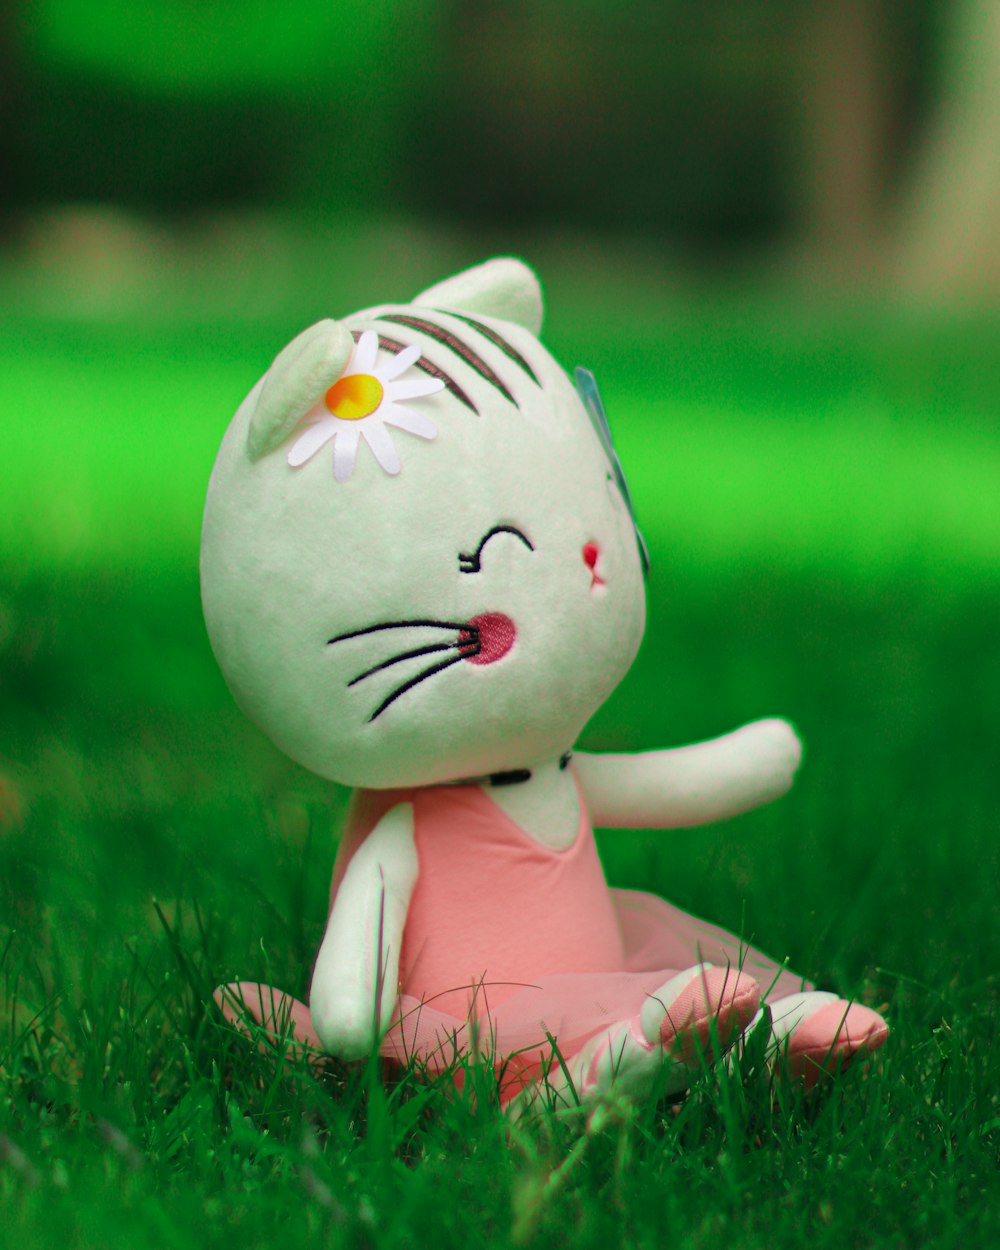 white and pink cat plush toy on green grass